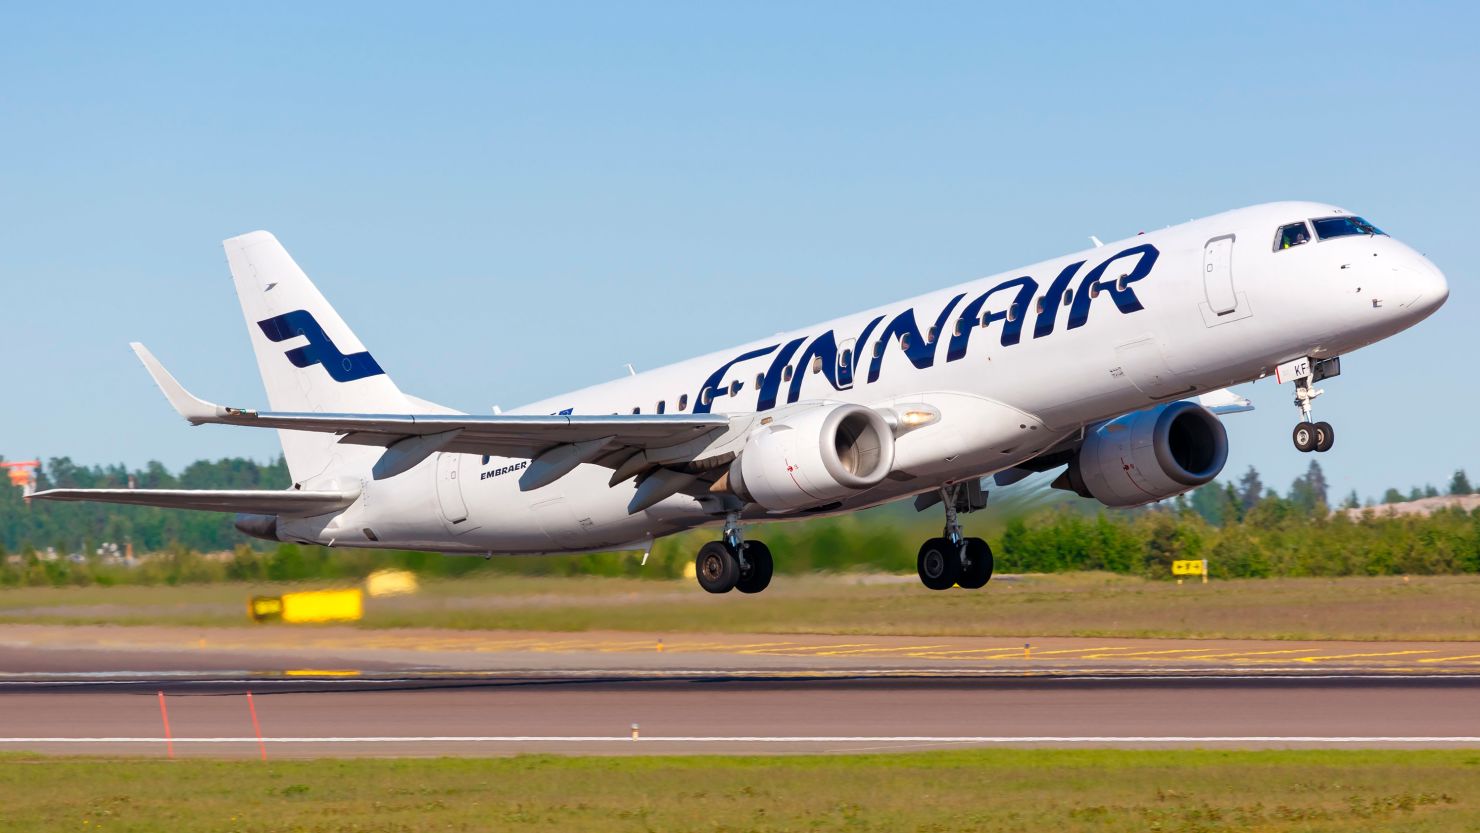 Finnair is weighing volunteer passengers at the gate to collect data on travelers.